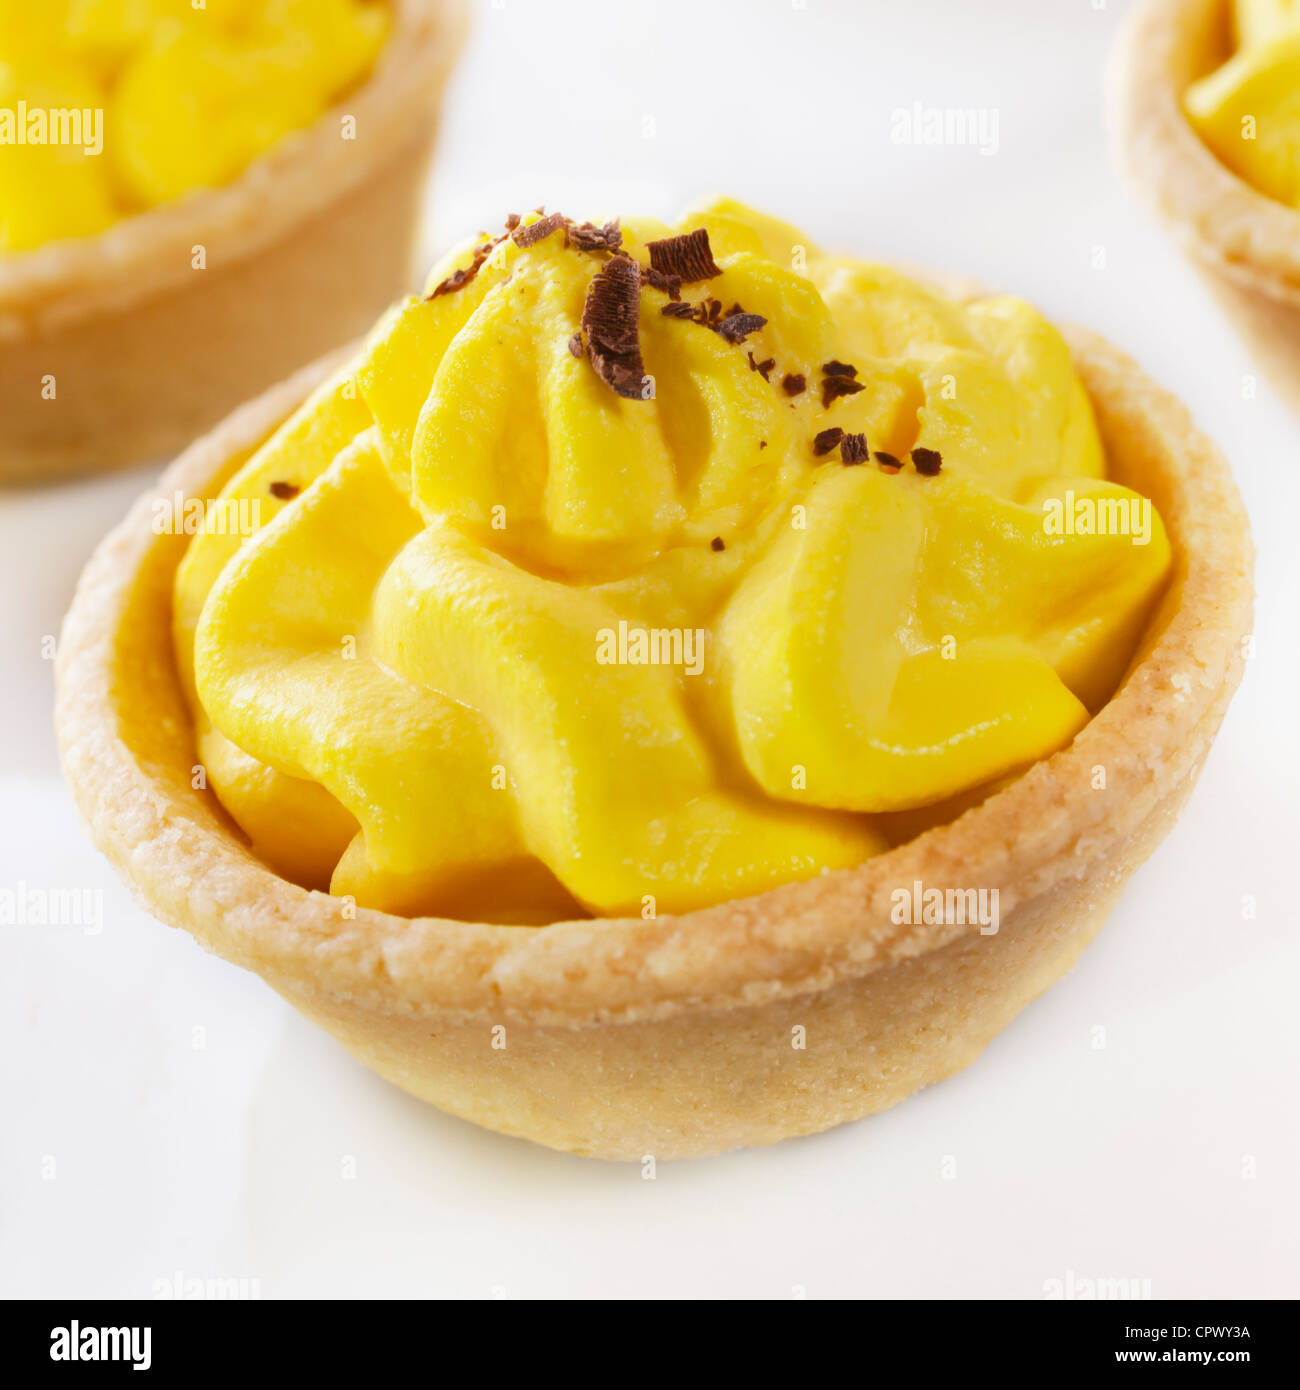 Pastry shells filled with lemon flavoured cream, topped with chocolate. Stock Photo